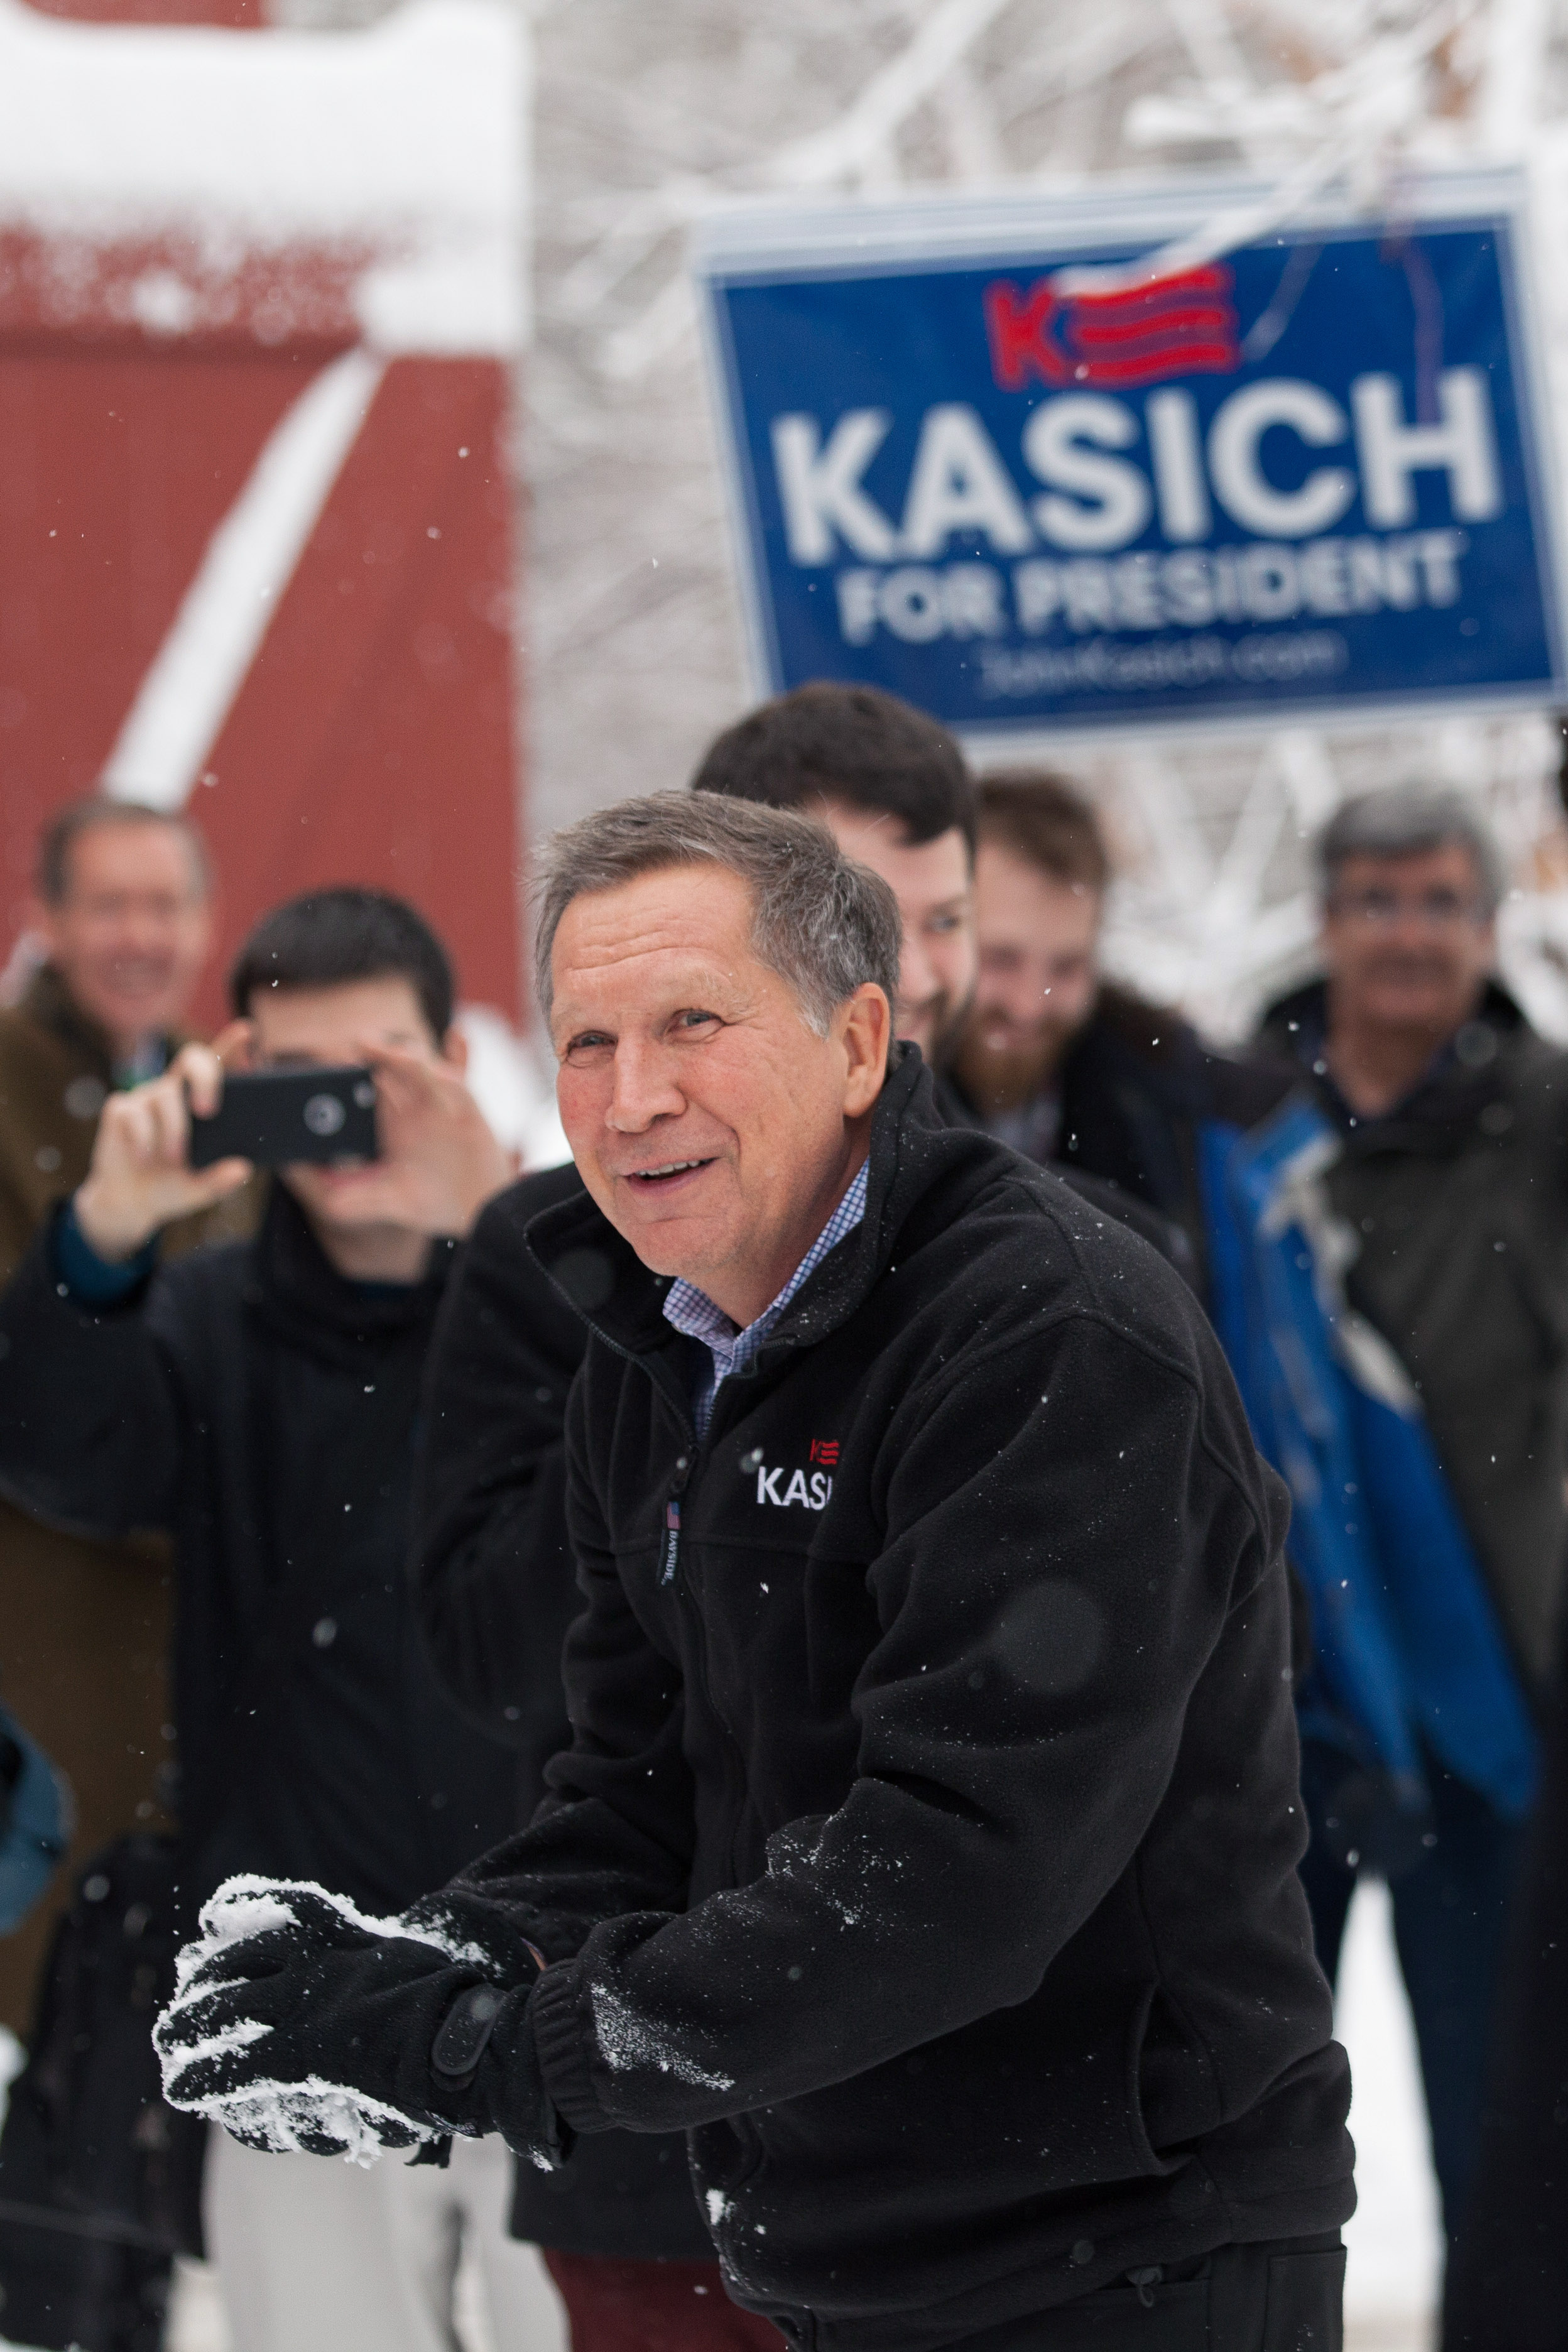 John Kasich smiles during a snowball fight following a town hall on Feb. 5 in Hollis, N.H. (Matthew Cavanaugh/Getty Images)